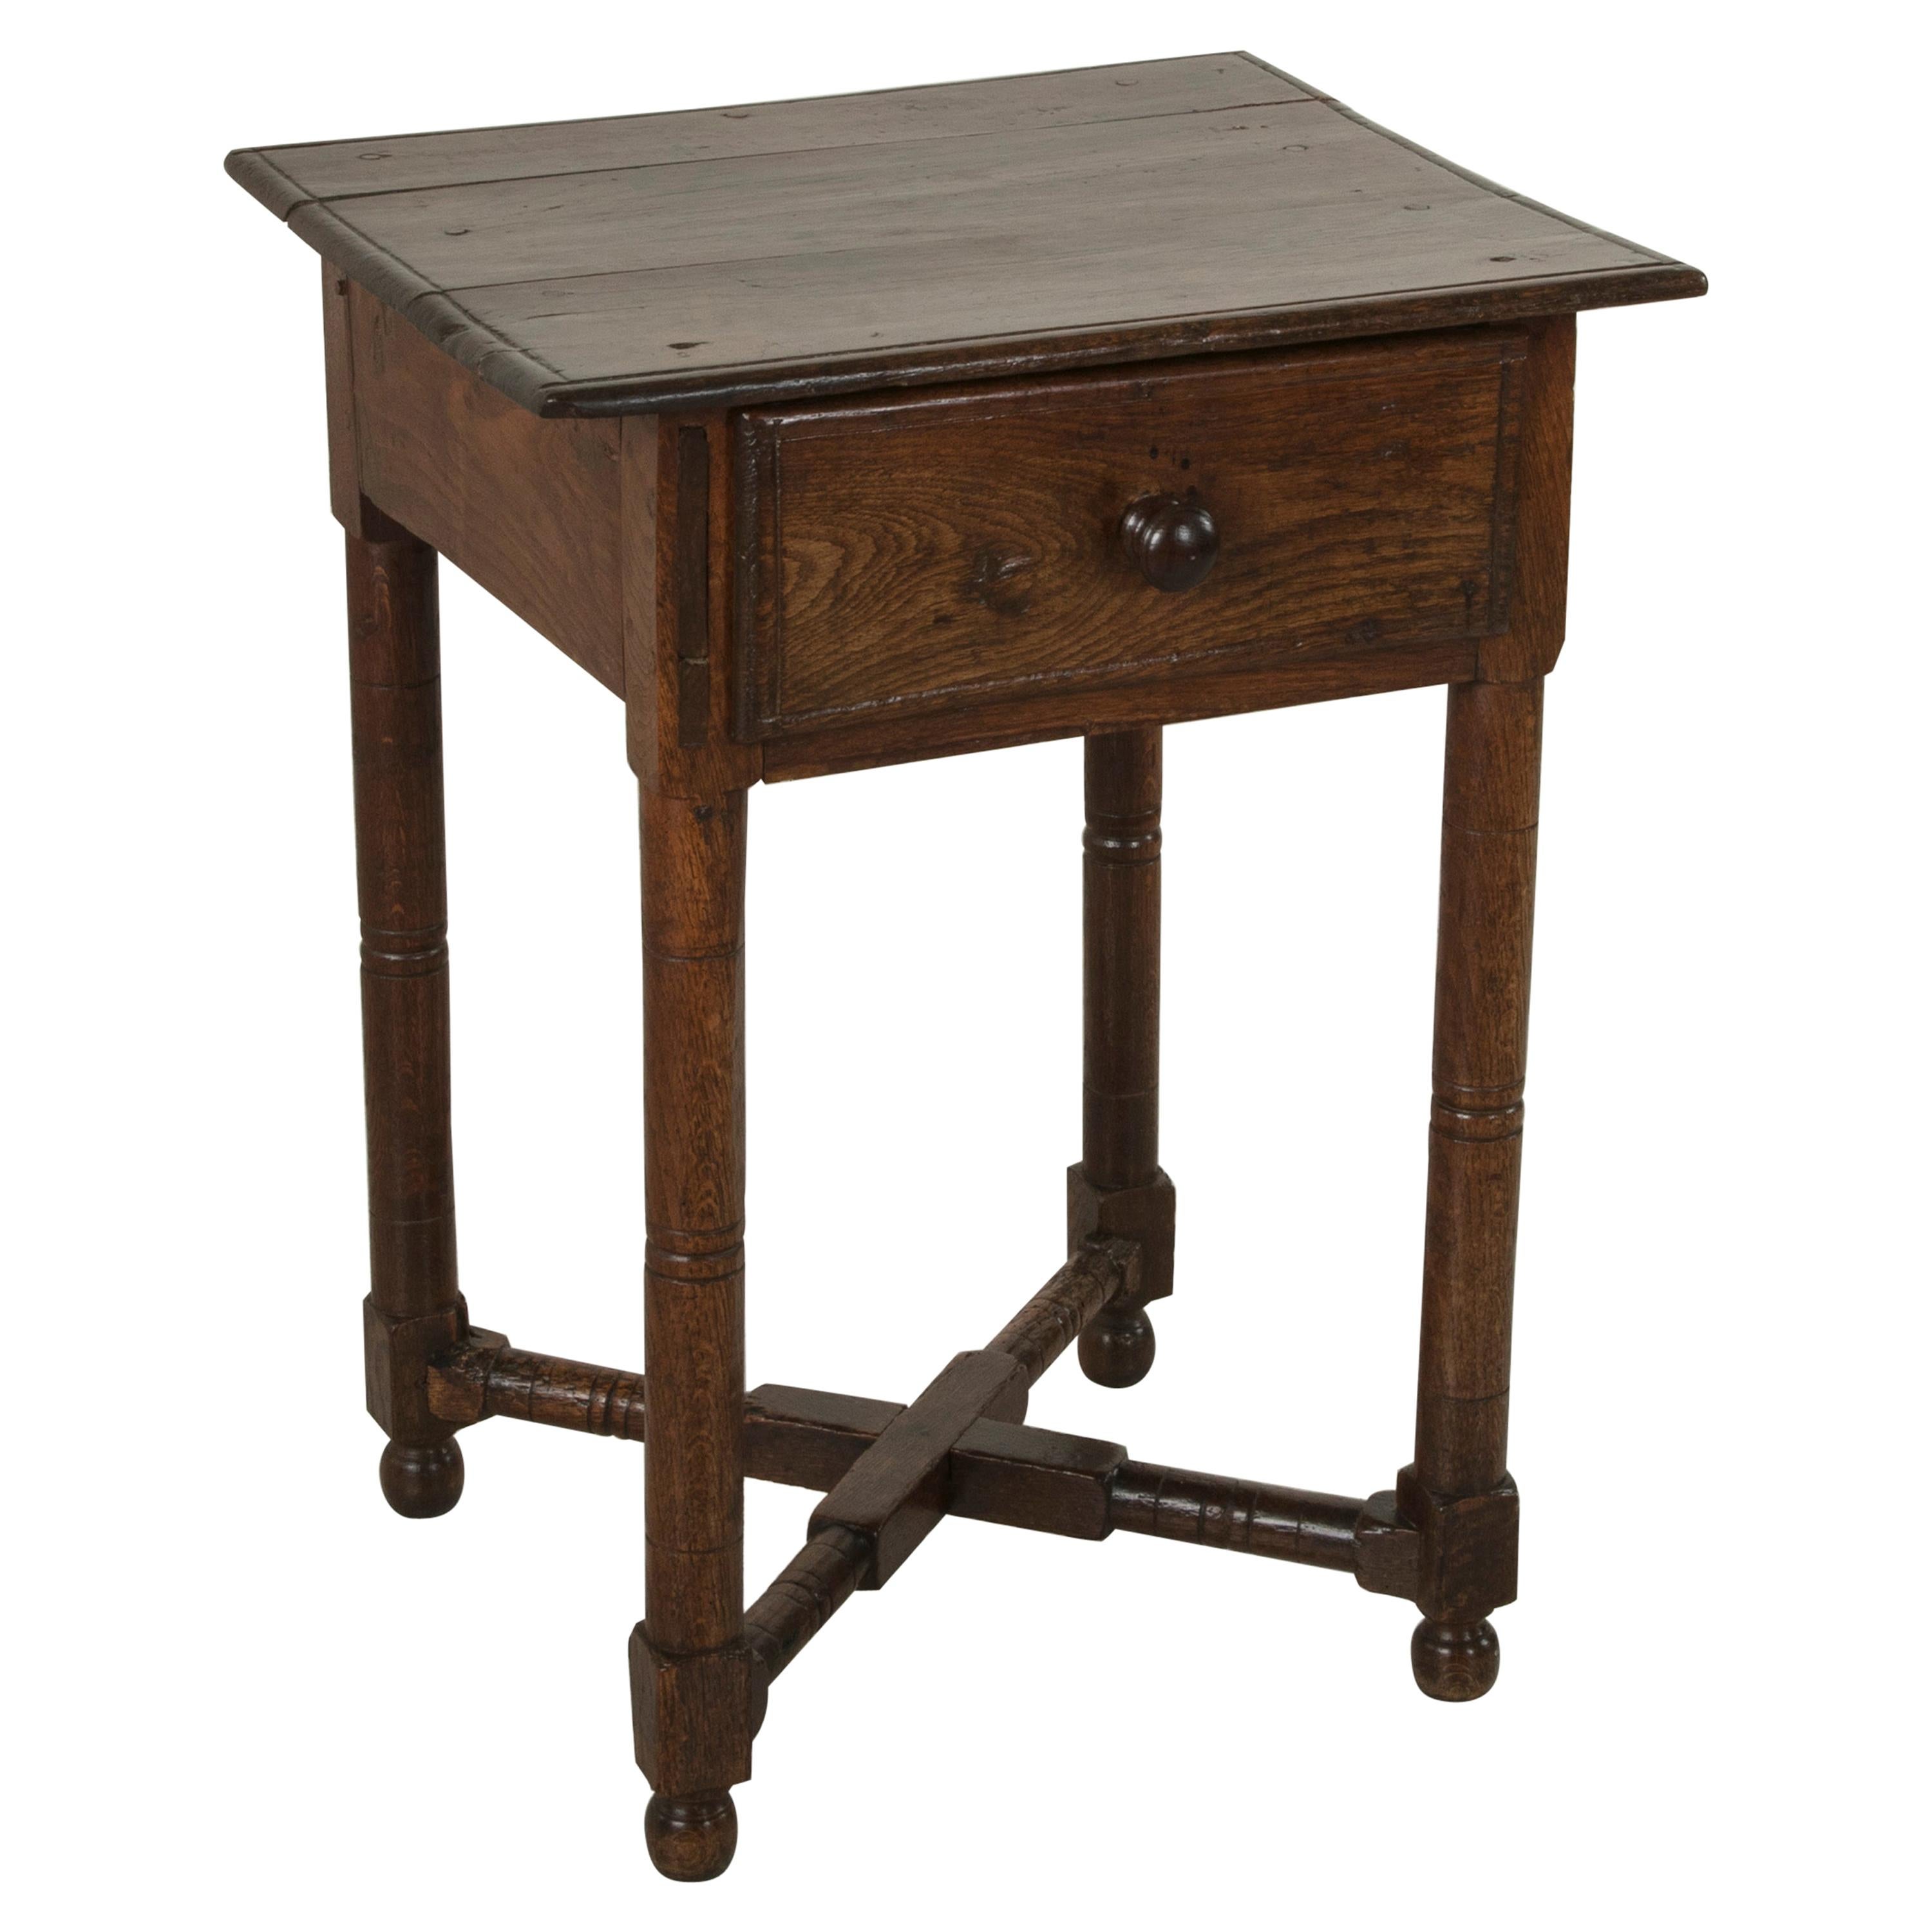 Late 19th Century French Artisan Made Oak Side table or End Table with Drawer